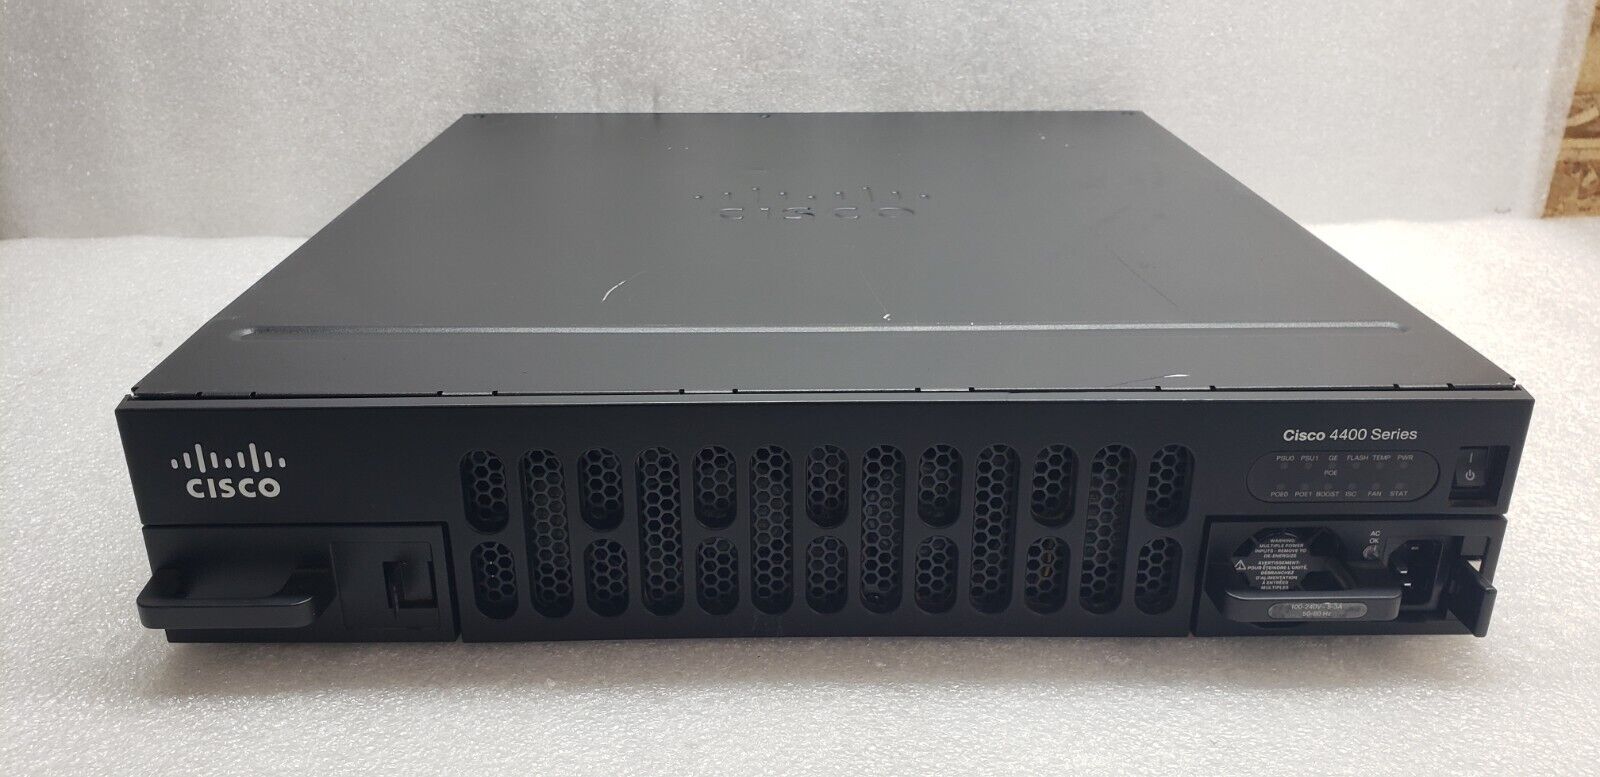 Cisco ISR 4400 Series Integrated Service Router 4-Port PoE ISR4451-X/K9 (3) #99